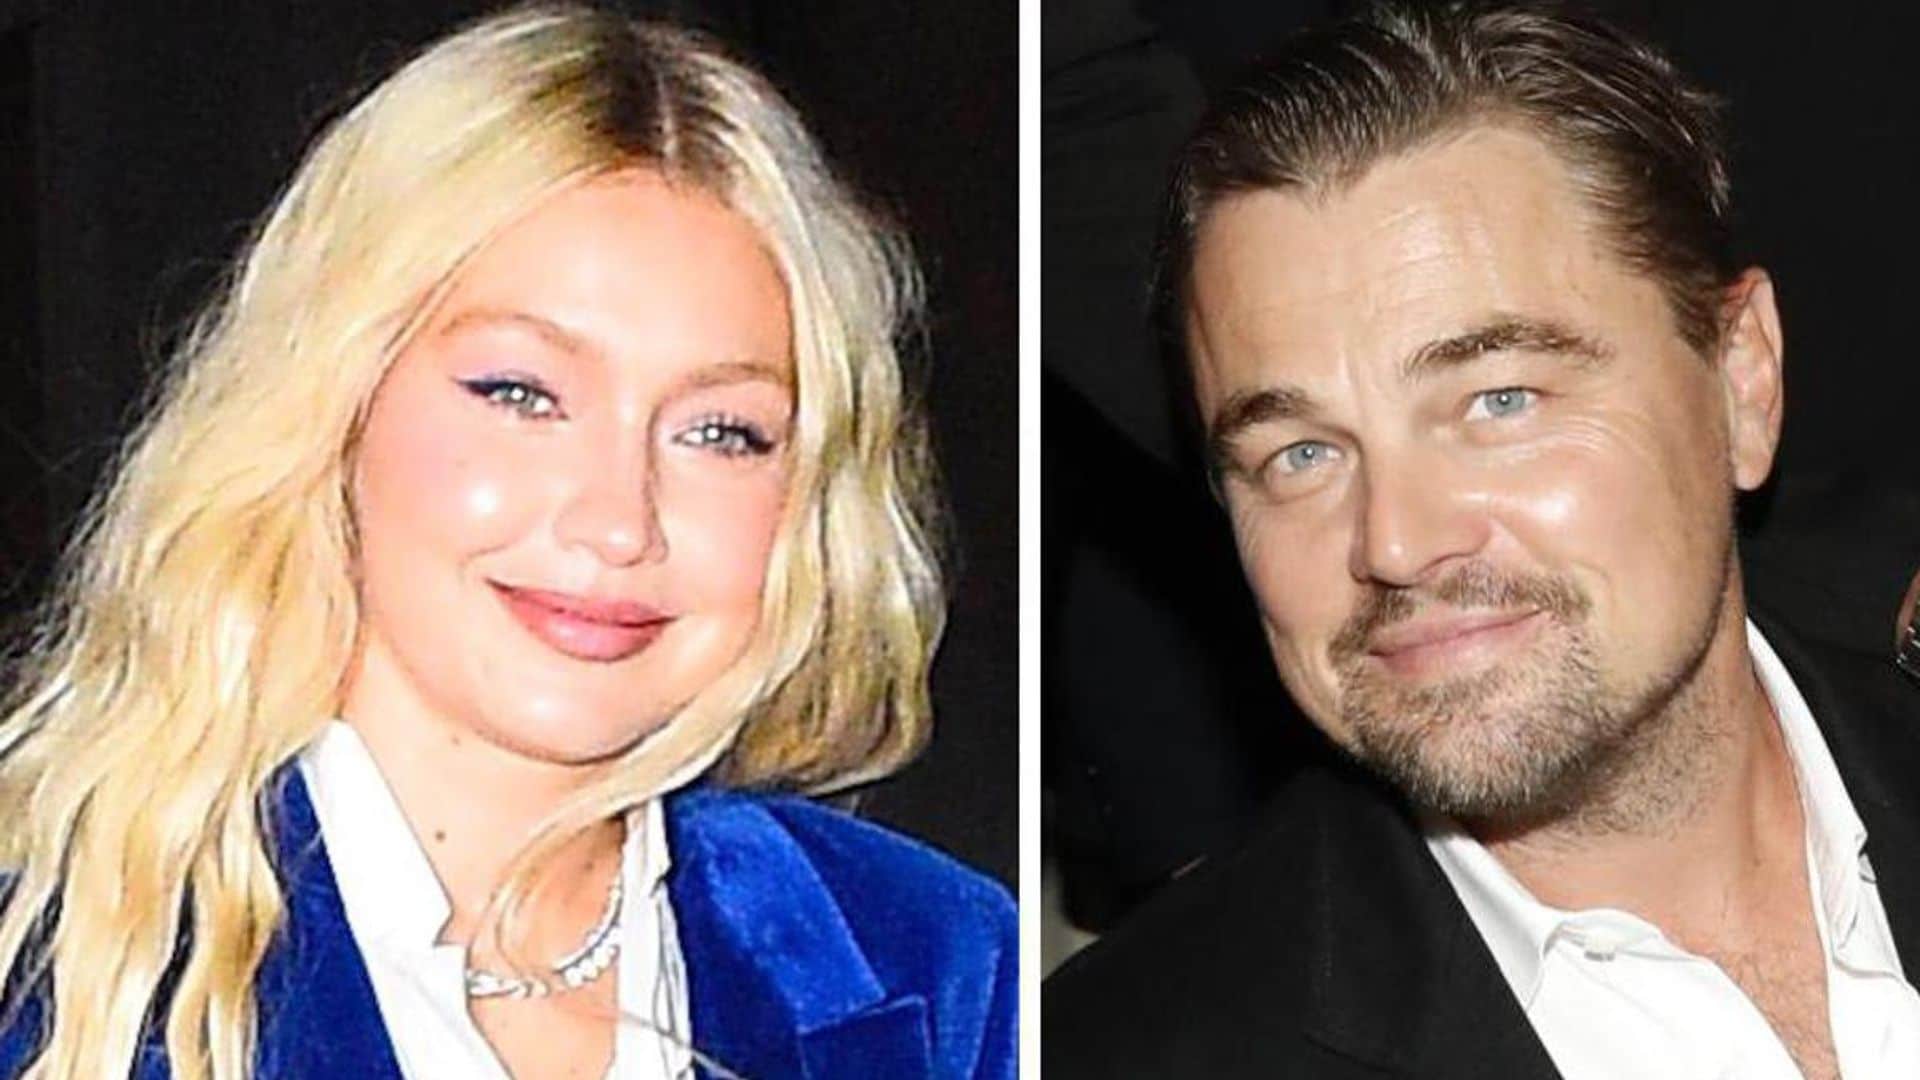 Leonardo DiCaprio and Gigi Hadid reportedly arrived at a Halloween event aboard the same party bus